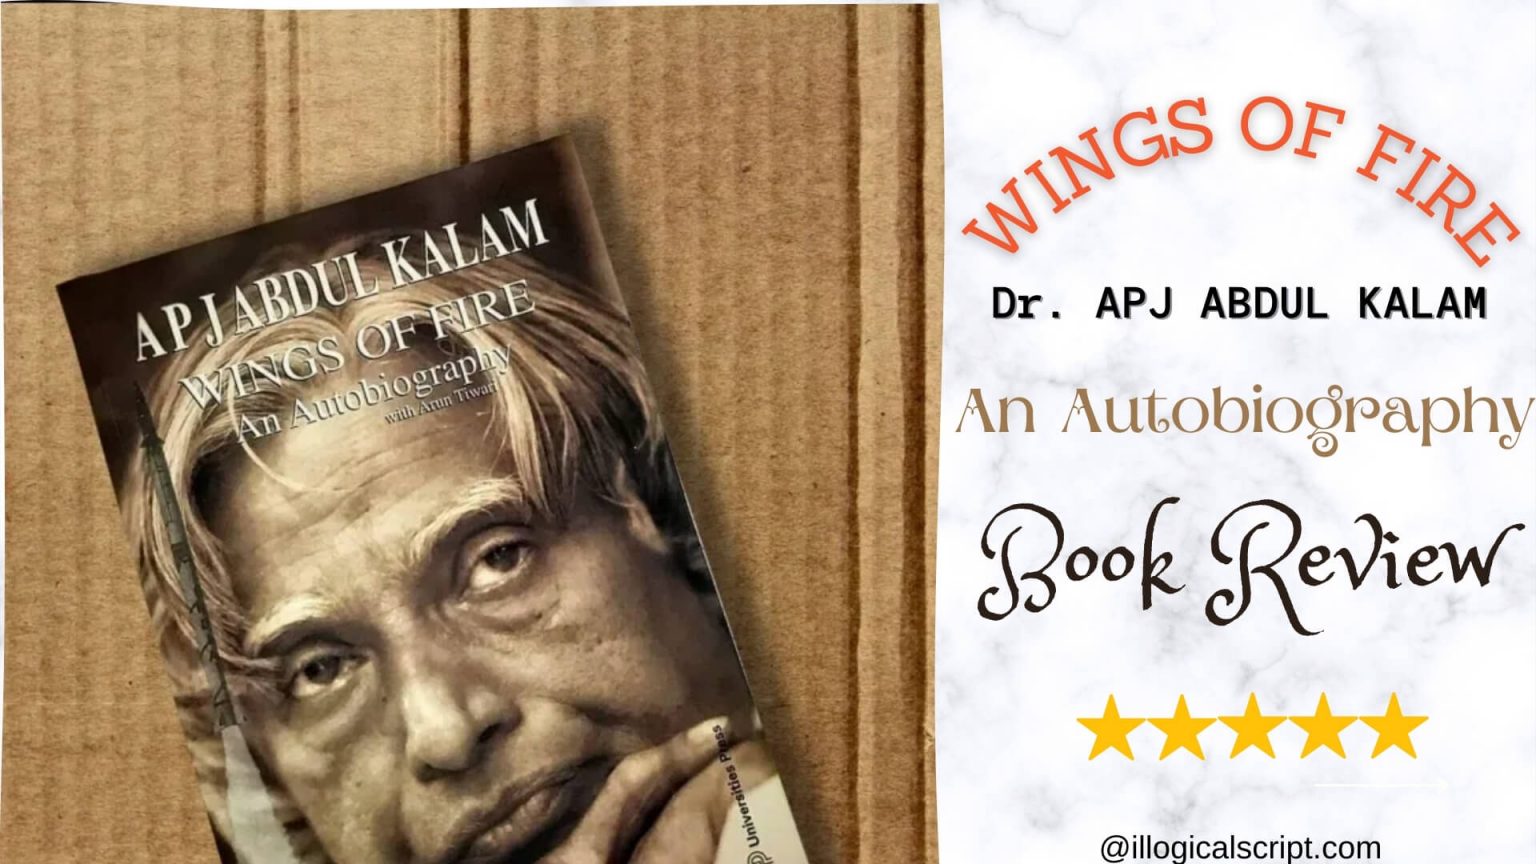 A book for all – Check out the Wings of Fire, an autobiography by A P J Abdul Kalam